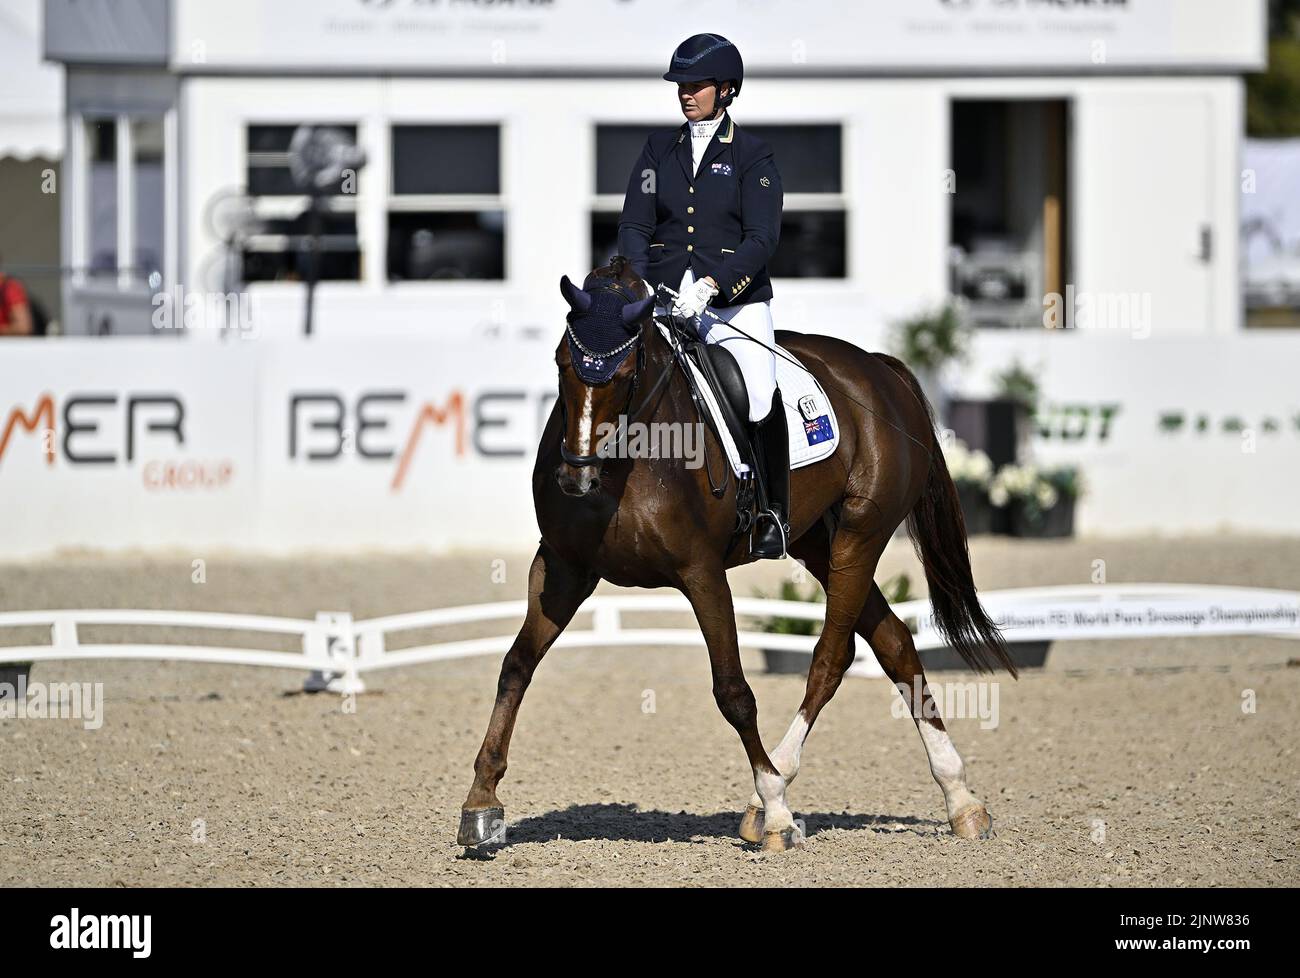 Herning, Denmark. 13th Aug, 2022. World Equestrian Games.Lisa Martin (AUS) riding JUICY WIGGLE during the FEI Para Dressage Team championships - Grade III. Credit: Sport In Pictures/Alamy Live News Stock Photo